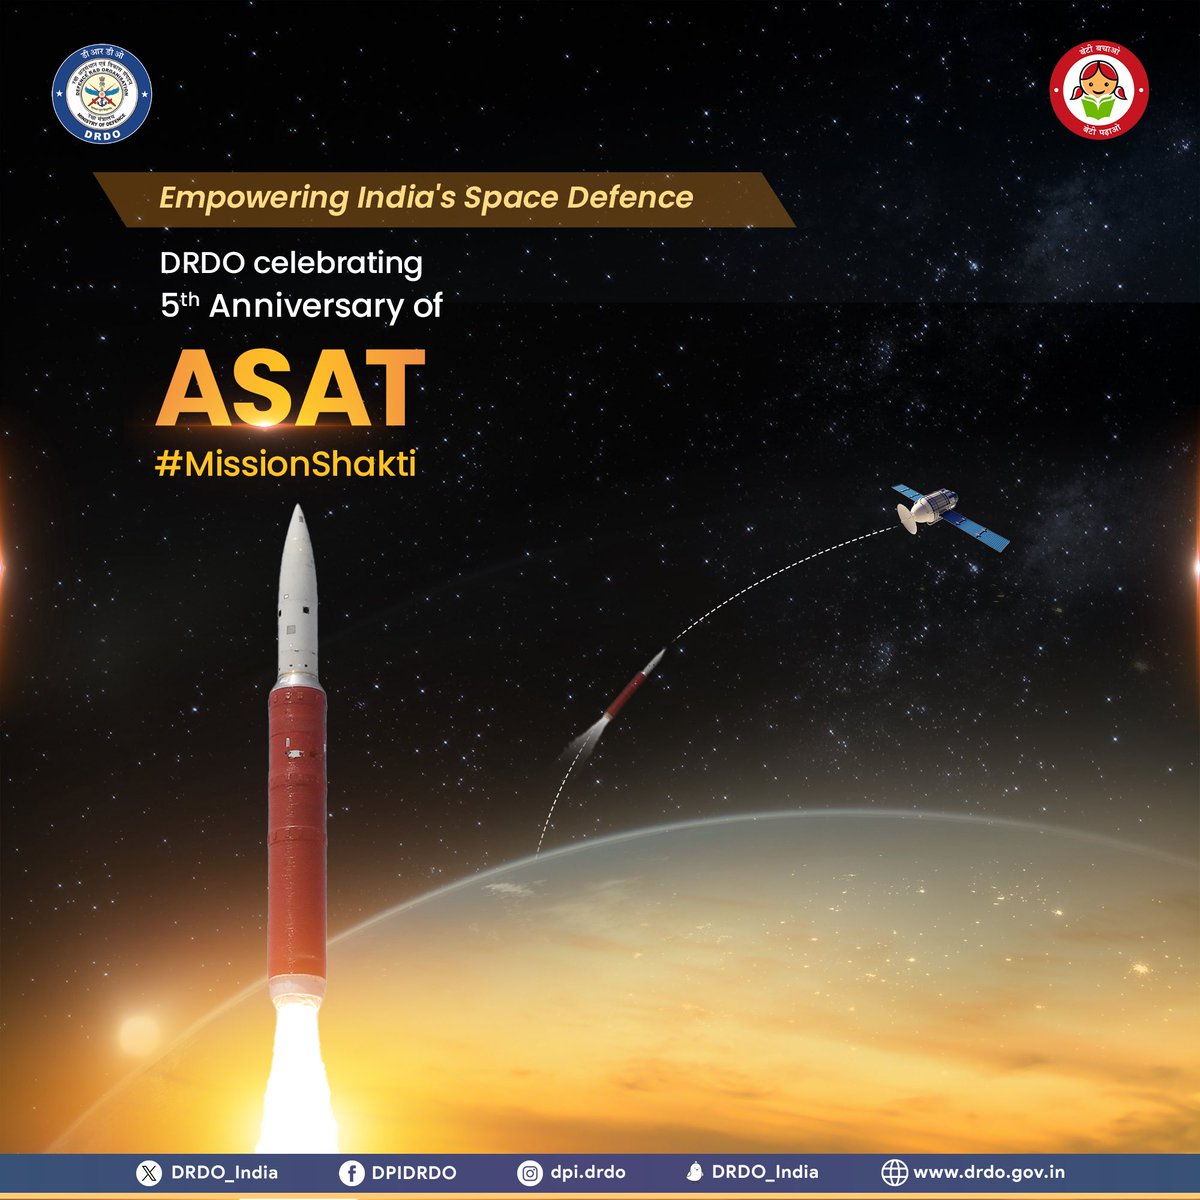 Celebrating 5th anniversary of #MissionShakti! ASAT showcased our ability to protect space assets in the 4th dimension of warfare. This mission marked a leap in space technology & acted as deterrence against threats.  @PMOIndia @DefenceMinIndia @SpokespersonMoD